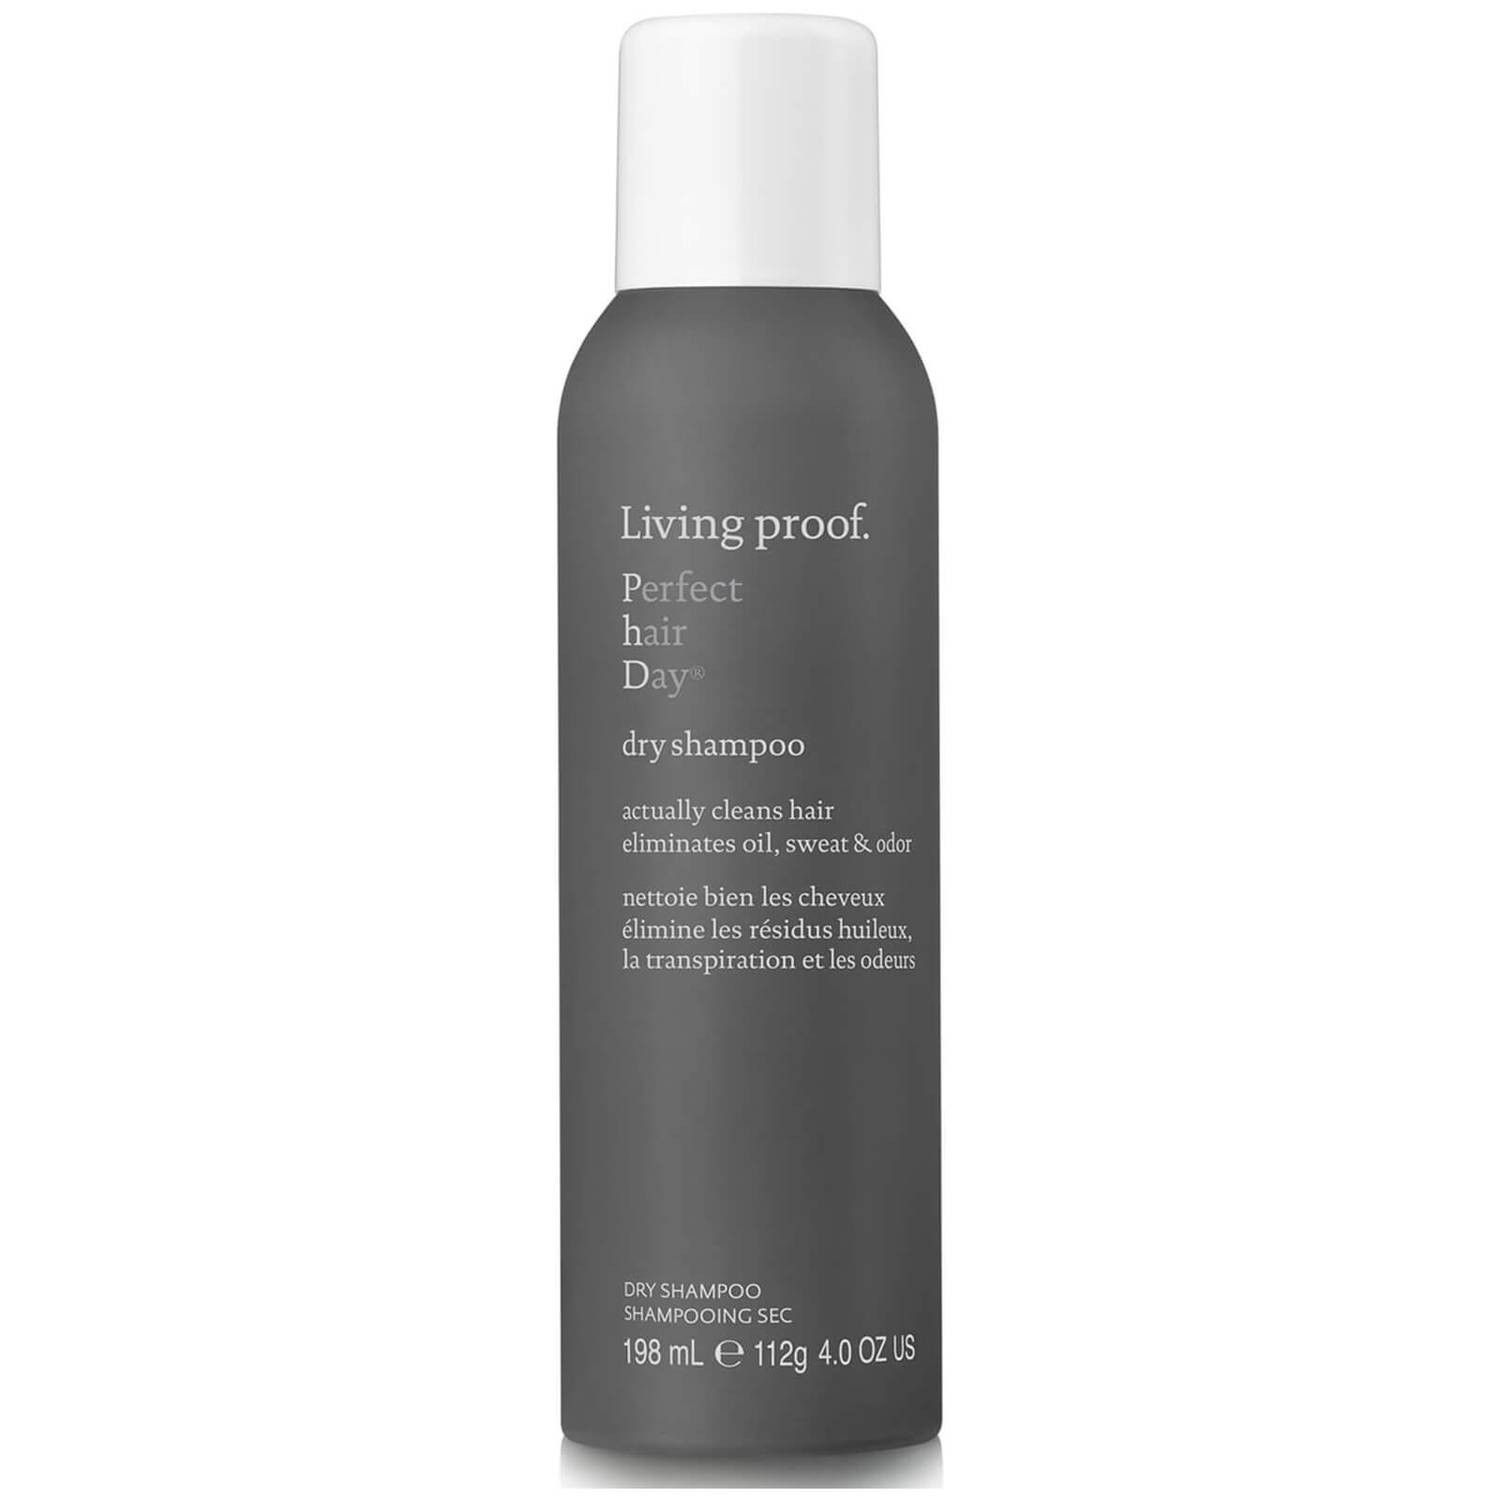 Living Proof Perfect Hair Day (PhD) Dry Shampoo 198ml | Cult Beauty